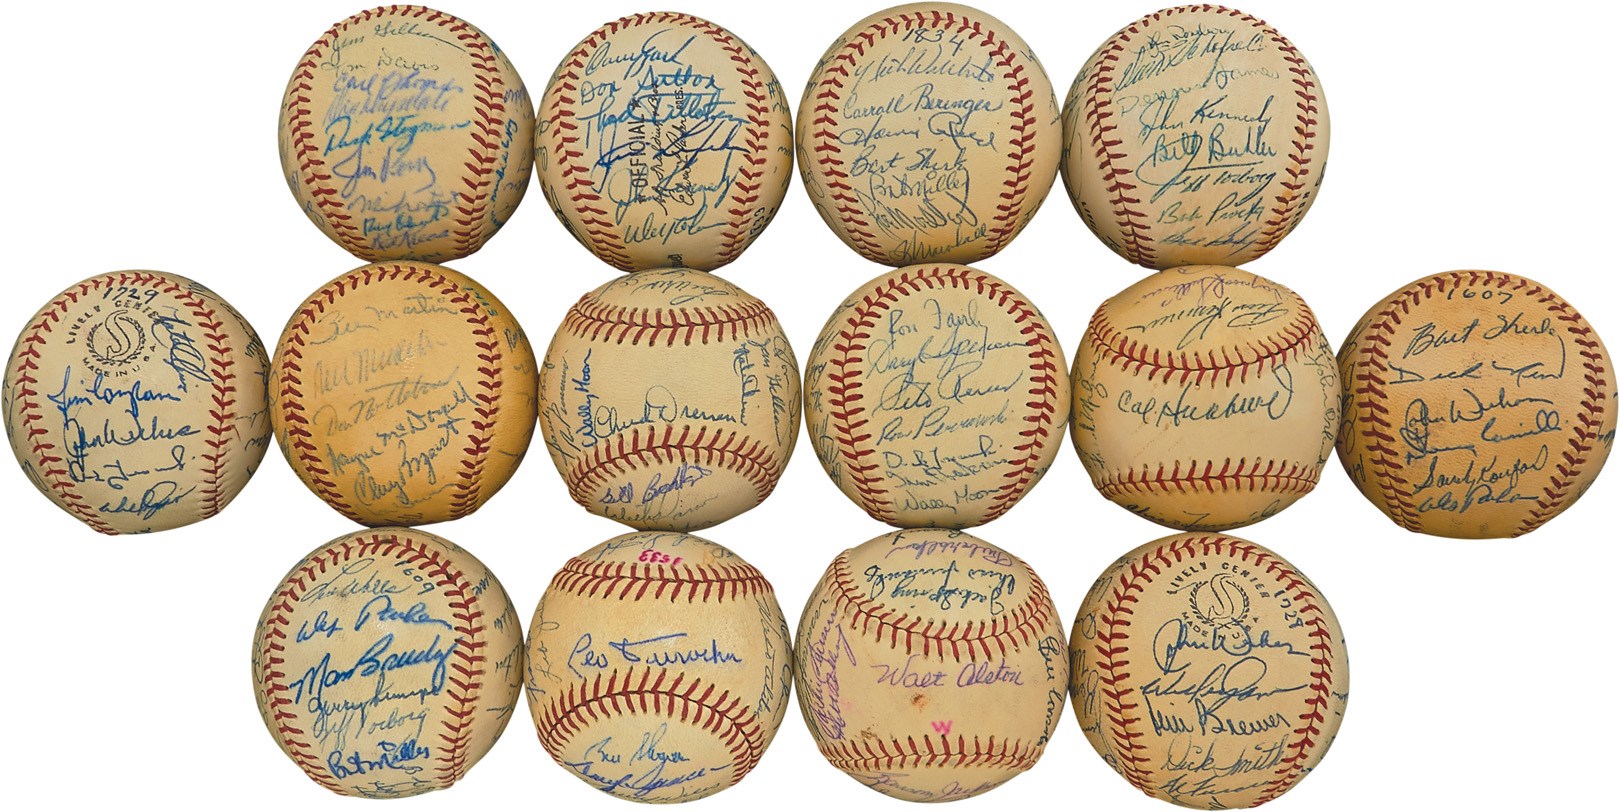 The John O'connor Signed Baseball Collection - 1957-67 Brooklyn/LA Dodgers Team-Signed Baseball Near Complete Run with Four (4) World Champions (14)